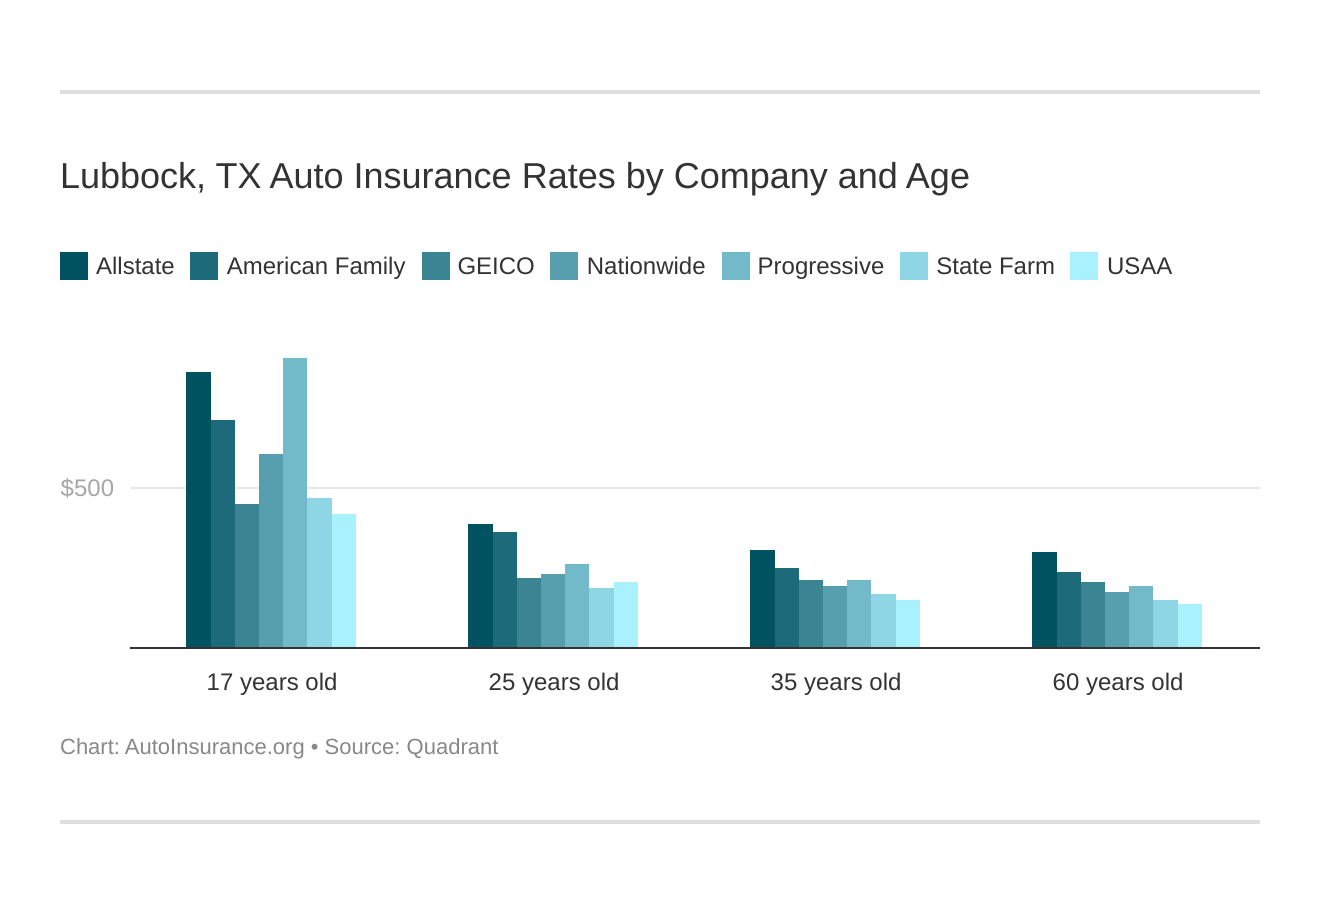 Lubbock, TX Auto Insurance Rates by Company and Age